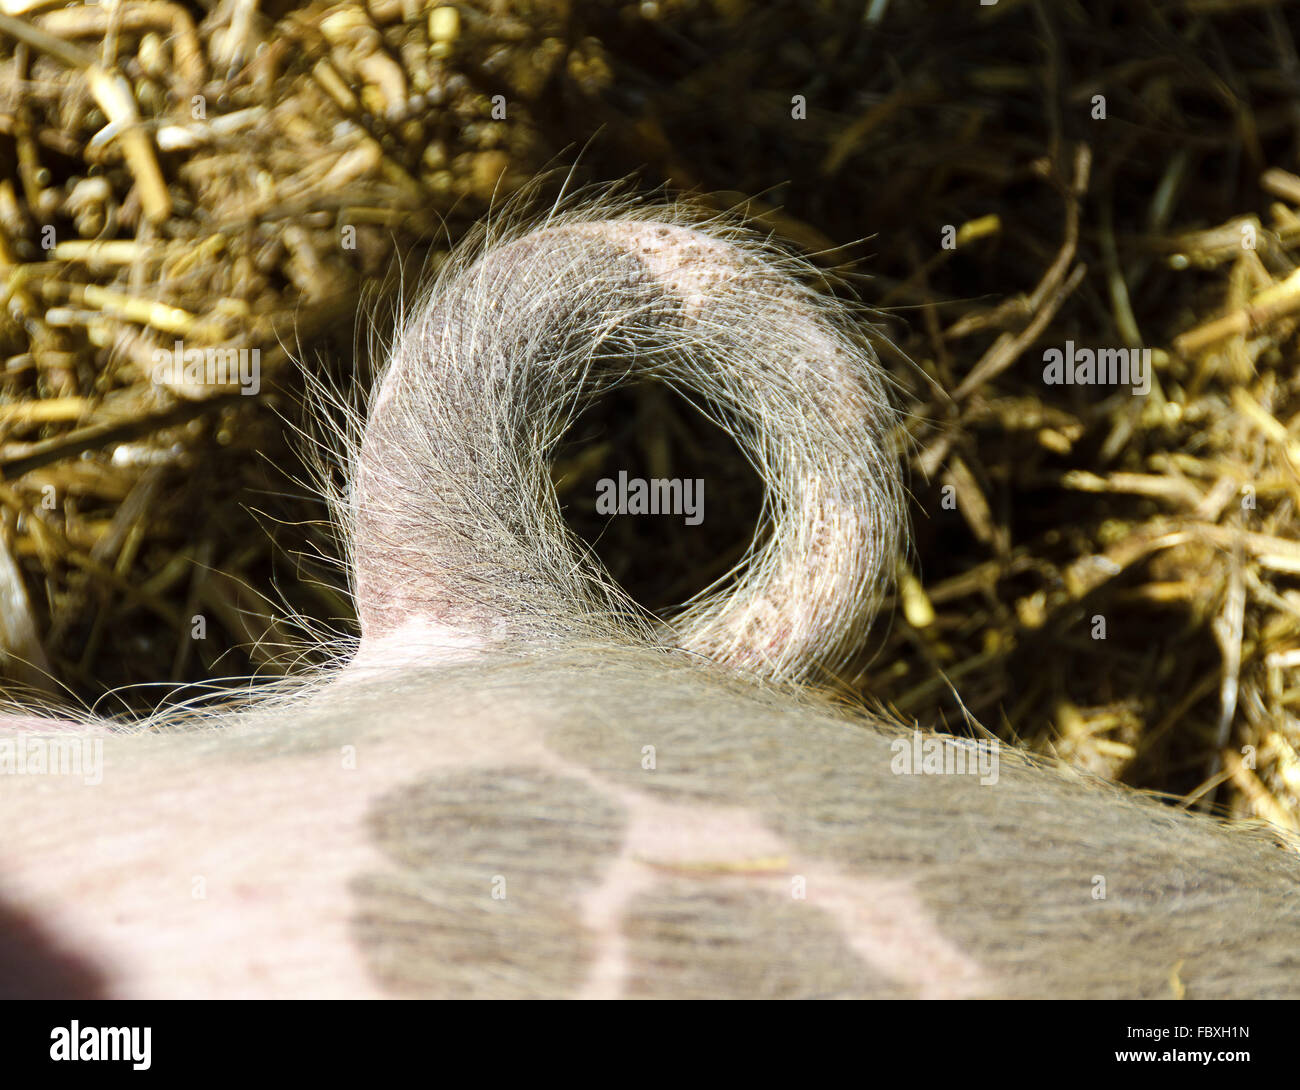 curled tail of a domestic pig Stock Photo